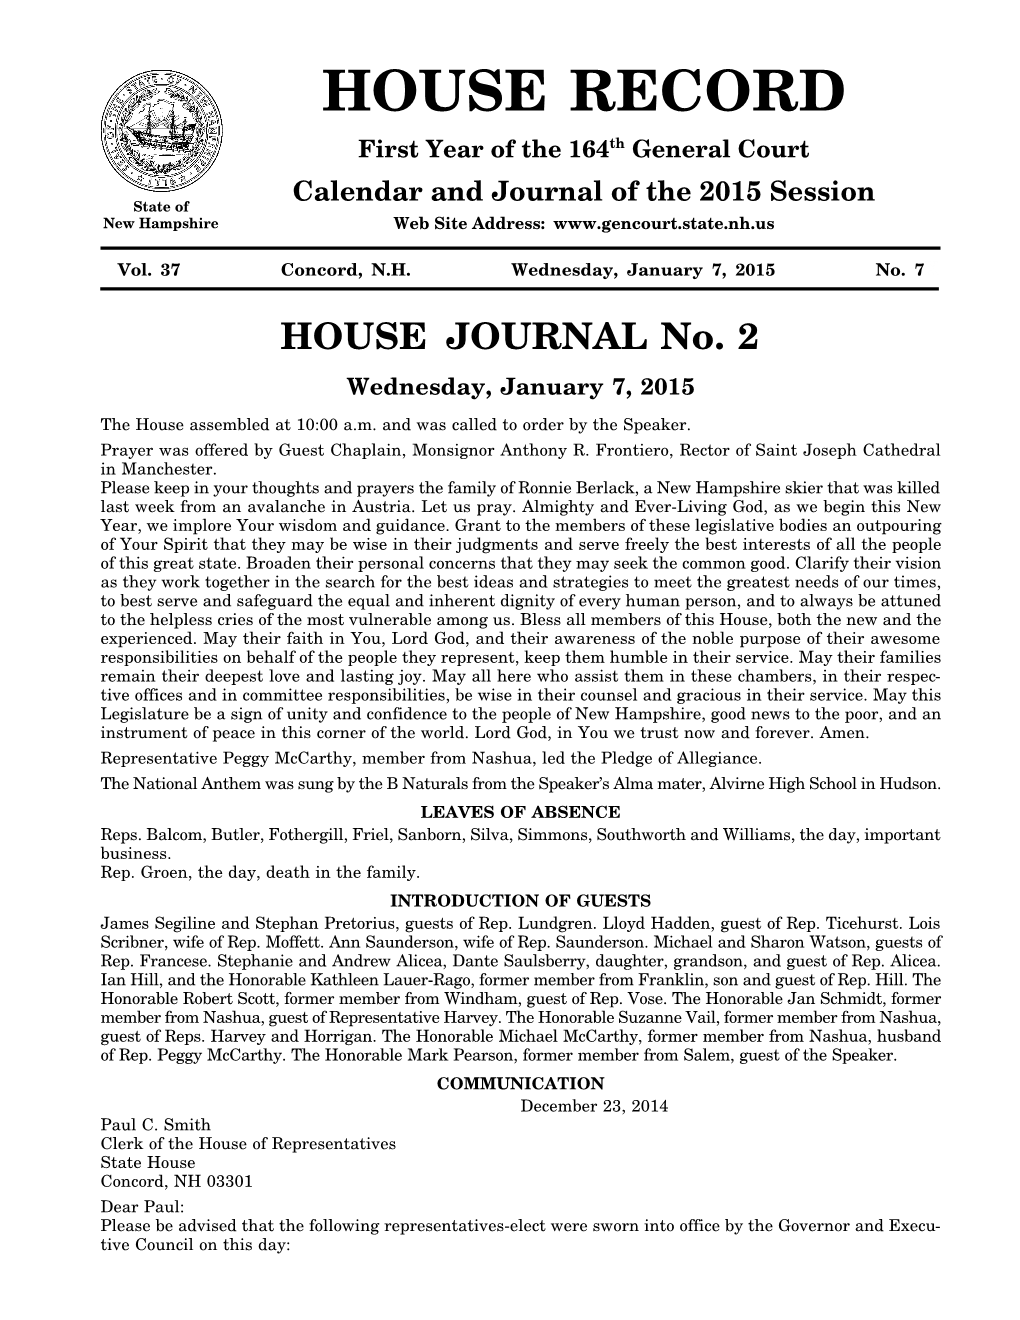 HOUSE JOURNAL No. 2 Wednesday, January 7, 2015 the House Assembled at 10:00 A.M